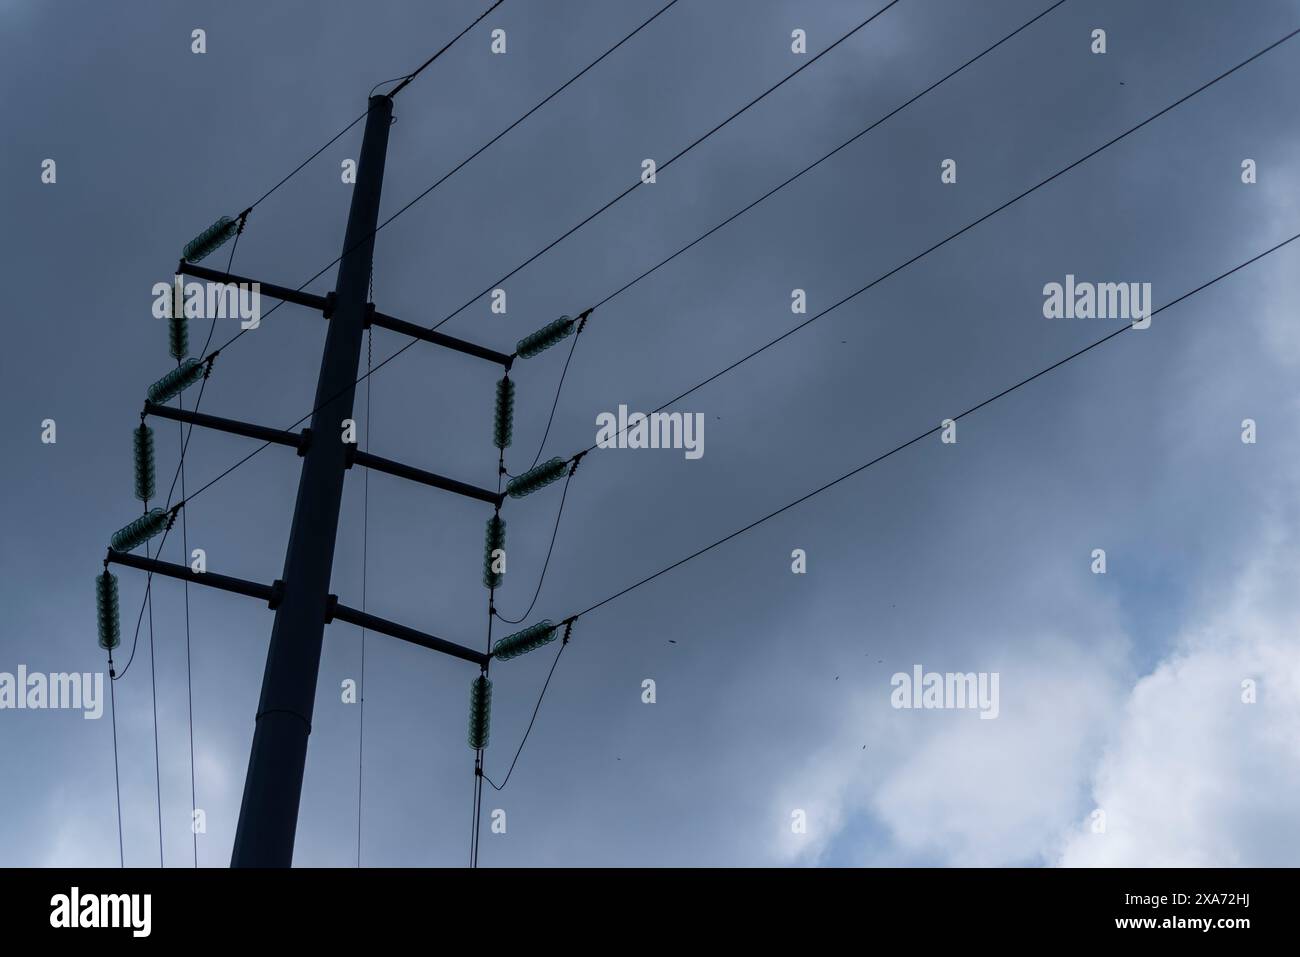 Electric pole silhouetted against dramatic cloudy sky Stock Photo